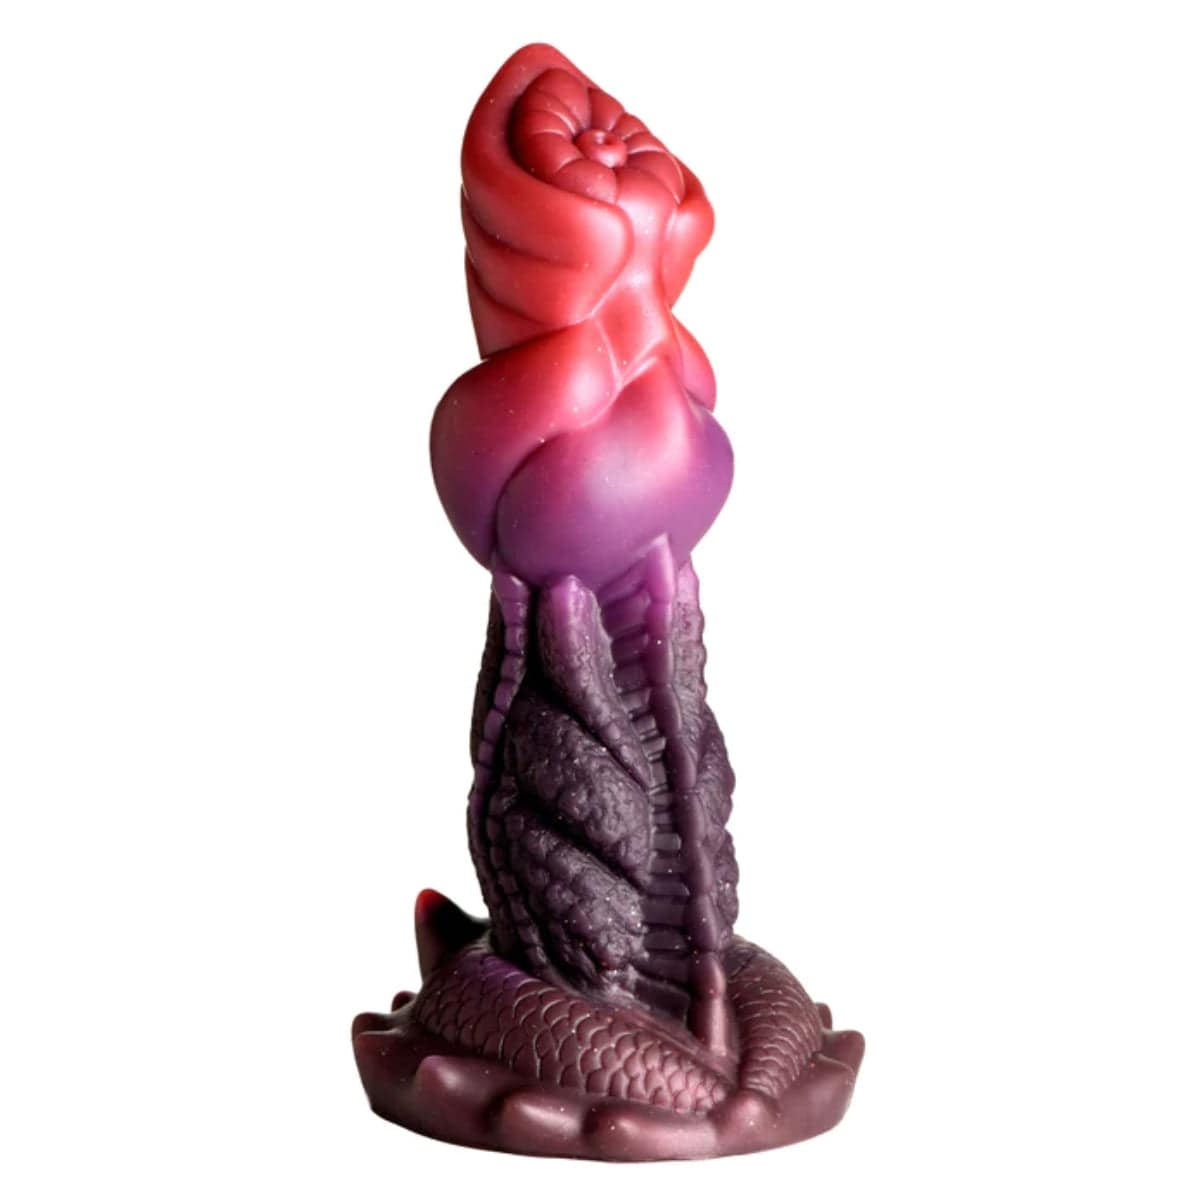 Creature Cocks - Deep Diver Silicone Suction Cup Dildo | 8.5 inches creature cocks - For Me To Love